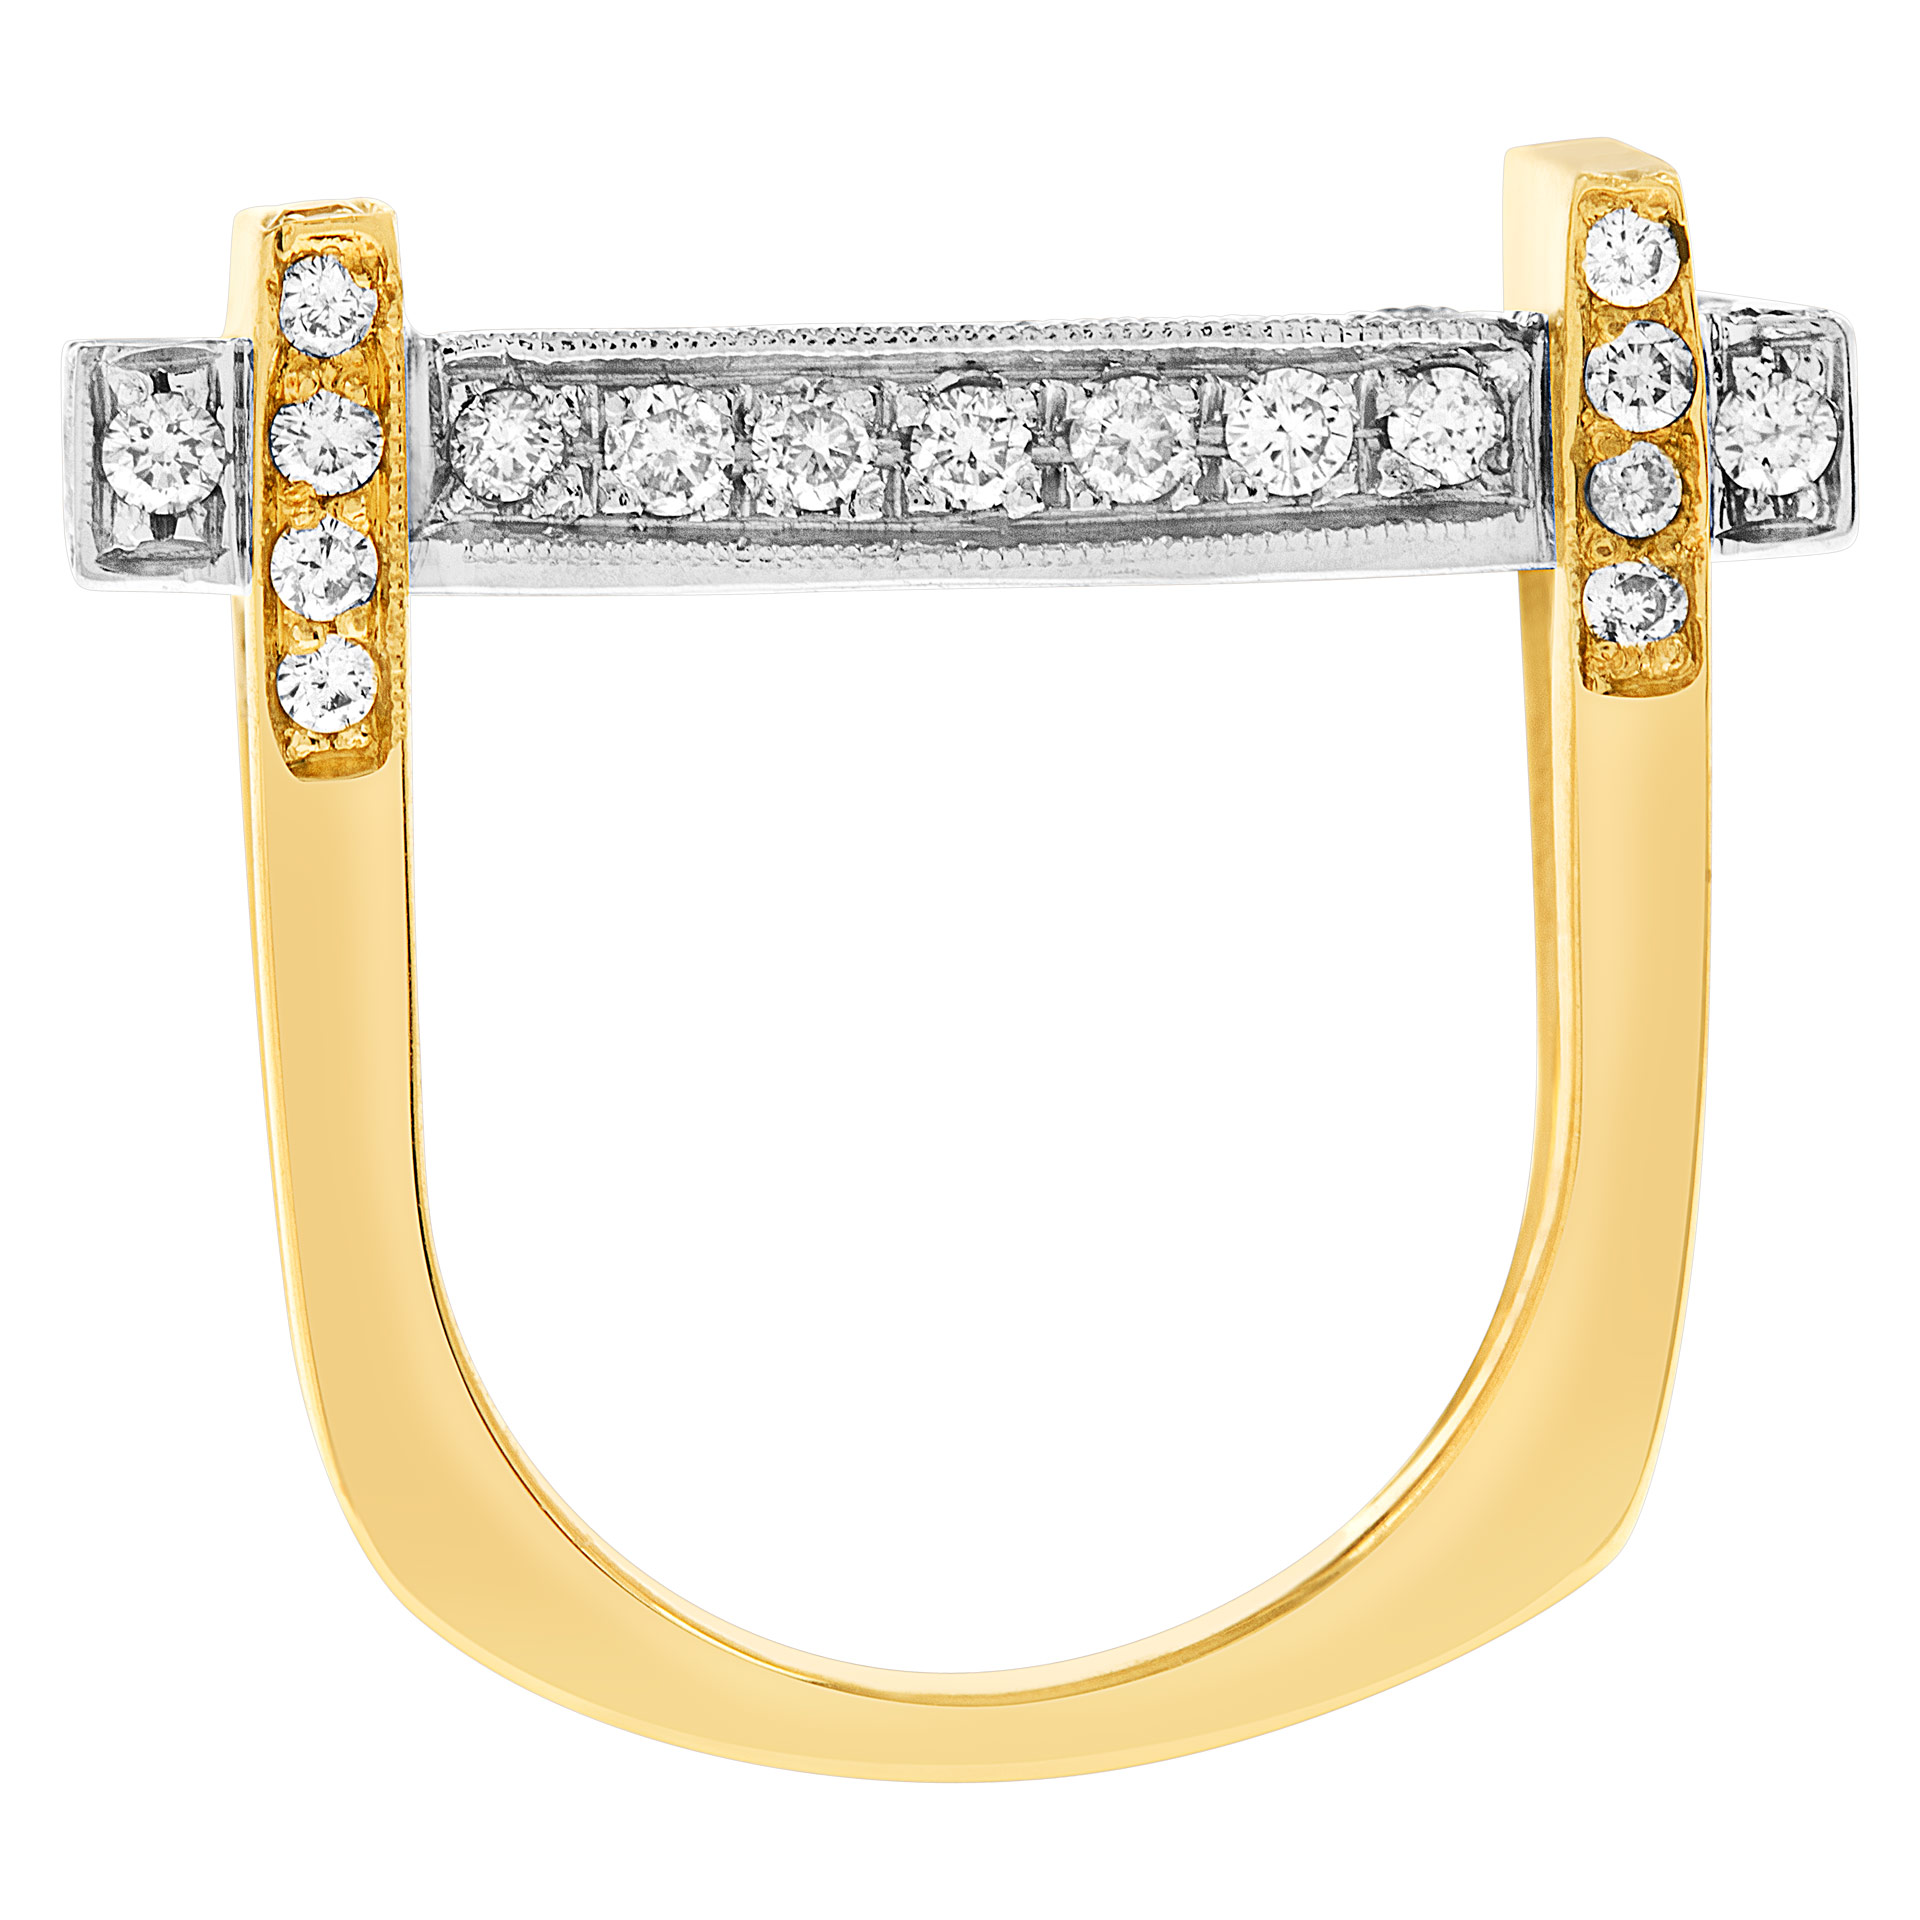 Diamond ring in 14k white and yellow gold image 3